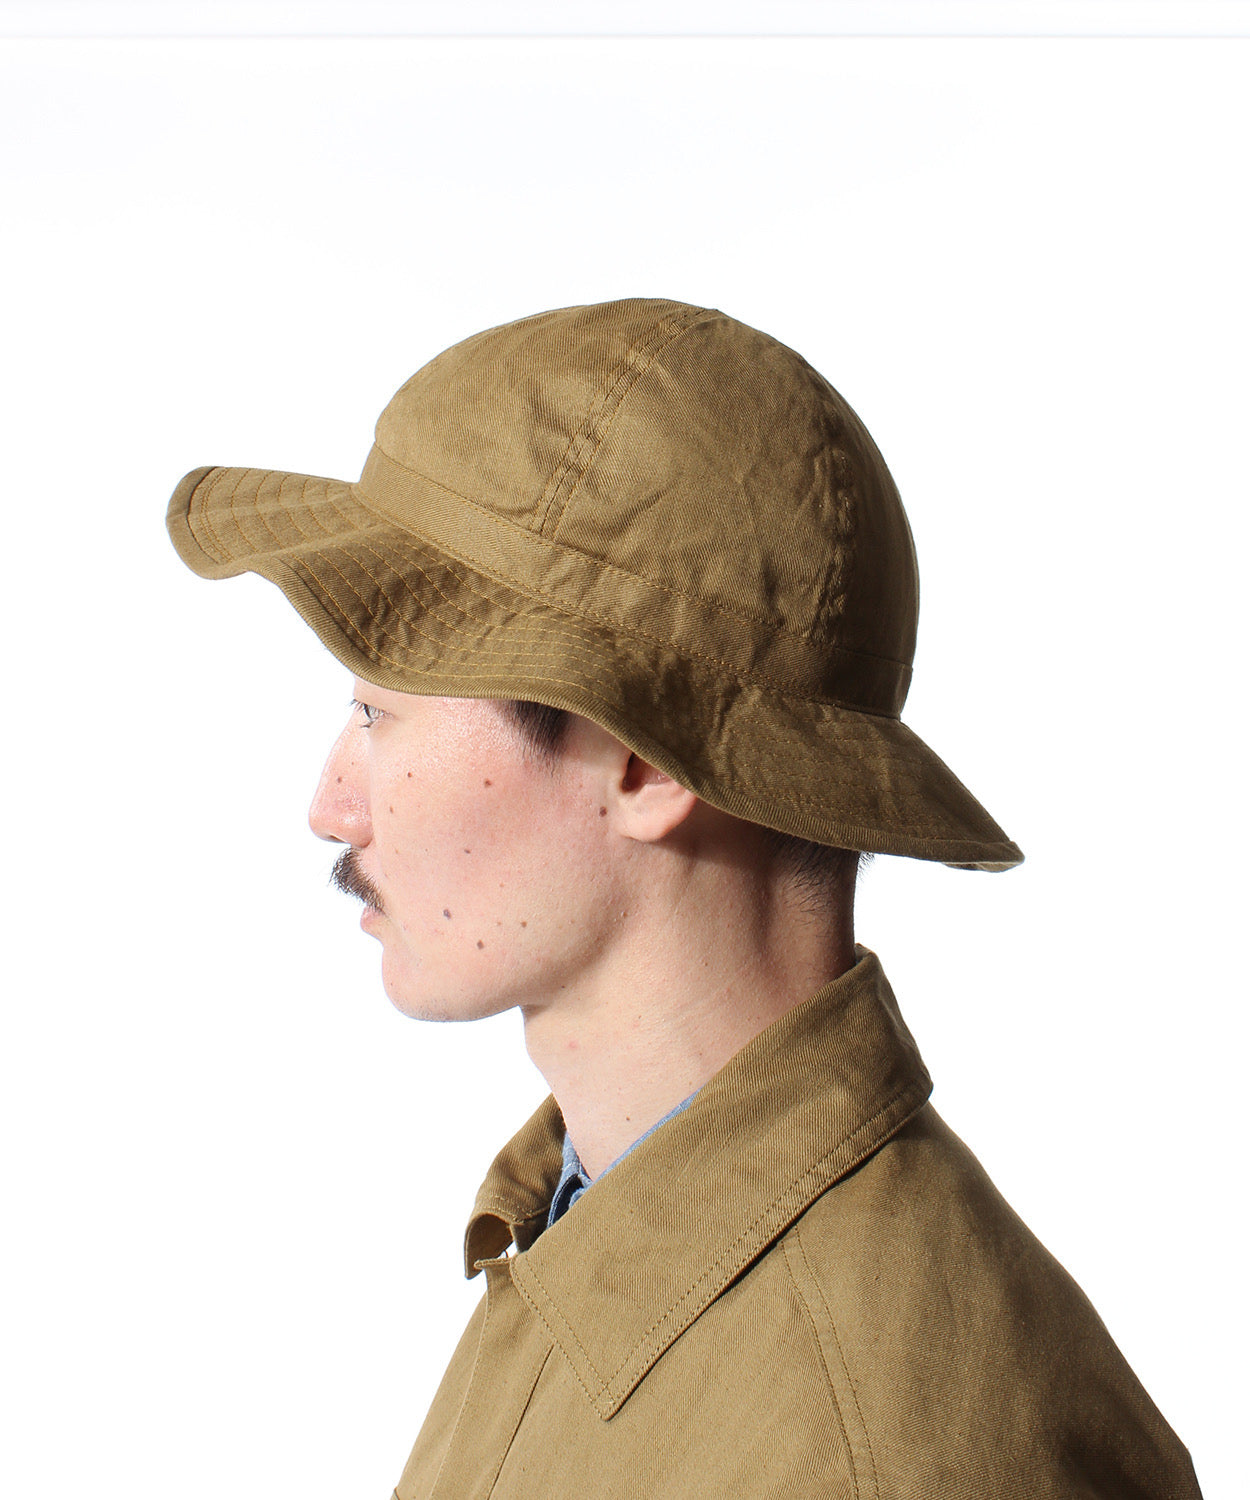 【ANATOMICA】1918 ARMY HAT / OLIVE DRAB